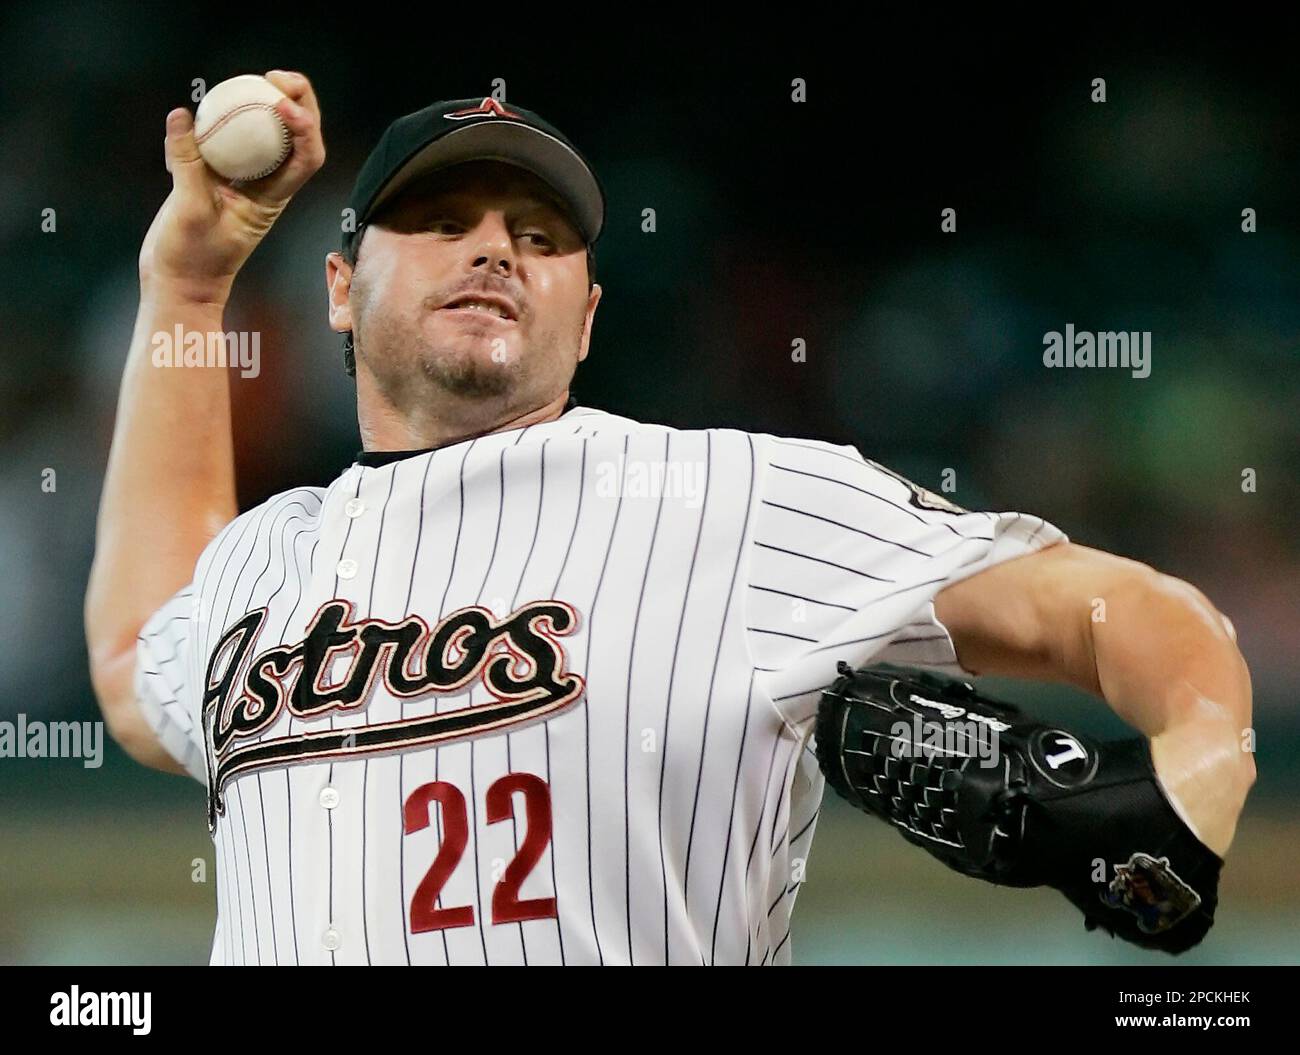 Houston Astros' Roger Clemens (22) pitches against the Milwaukee